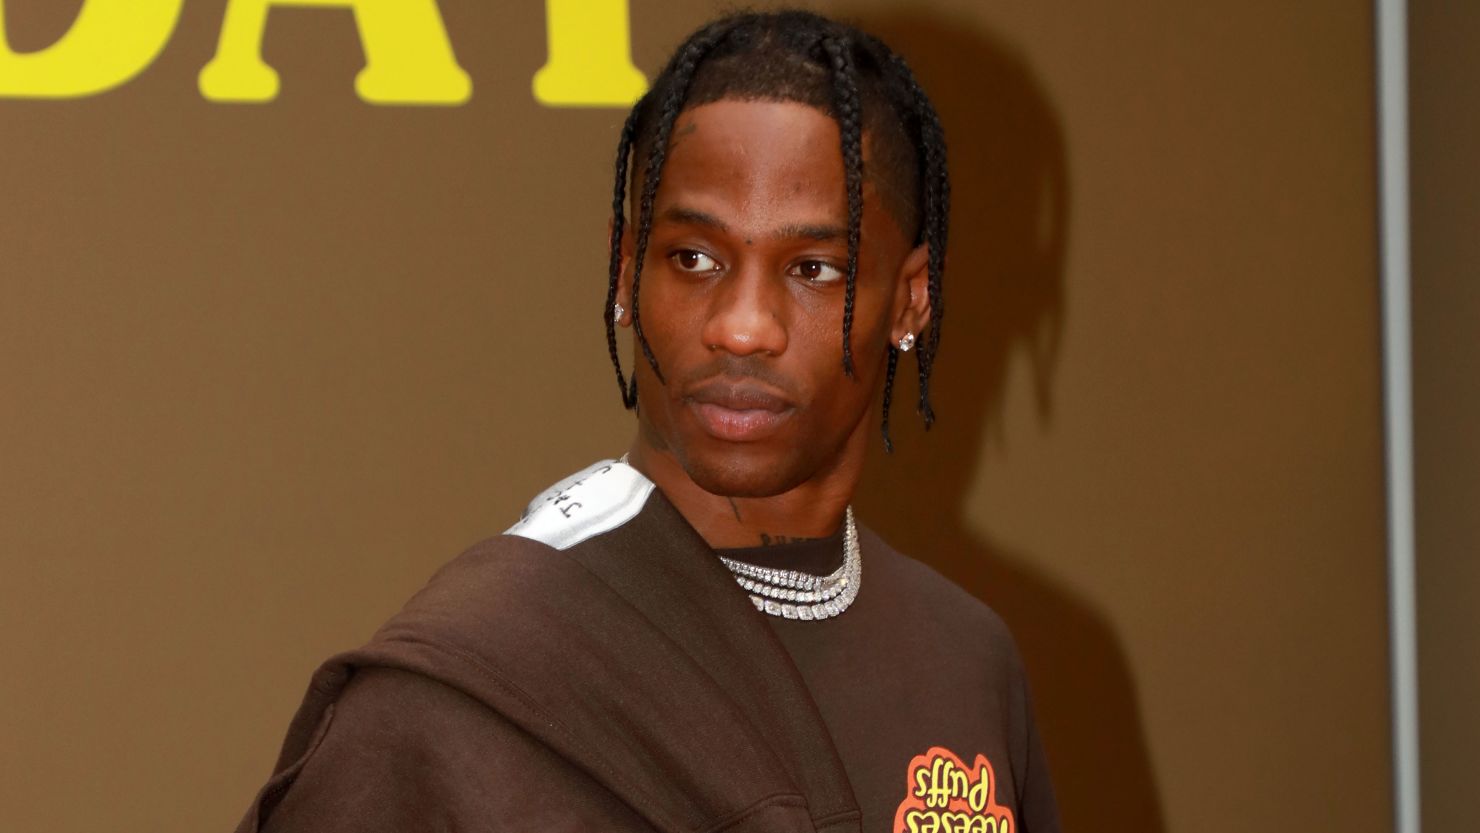 Travis Scott has promised to pay a semester's tuition for five HBCU students.